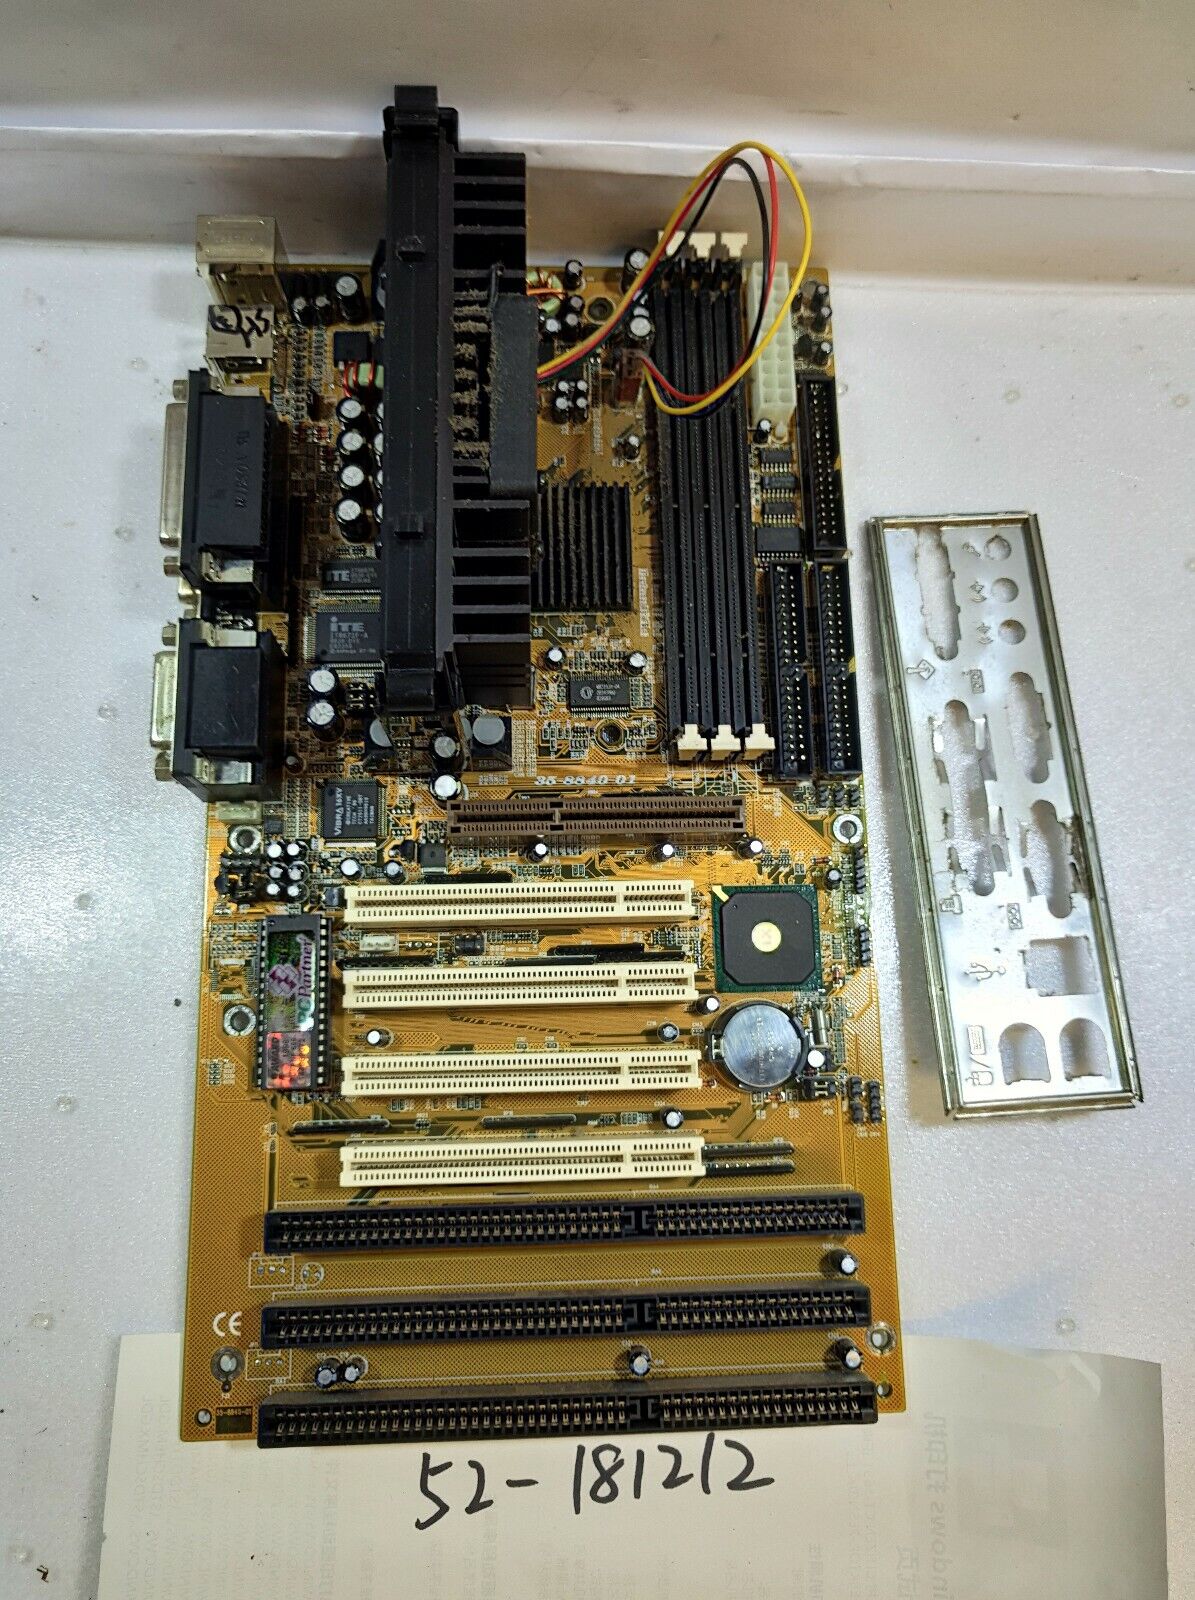 - VINTAGE 8840 MOTHERBOARD 35-8840-01 WITH CPU (UNKNOWN TYPE)